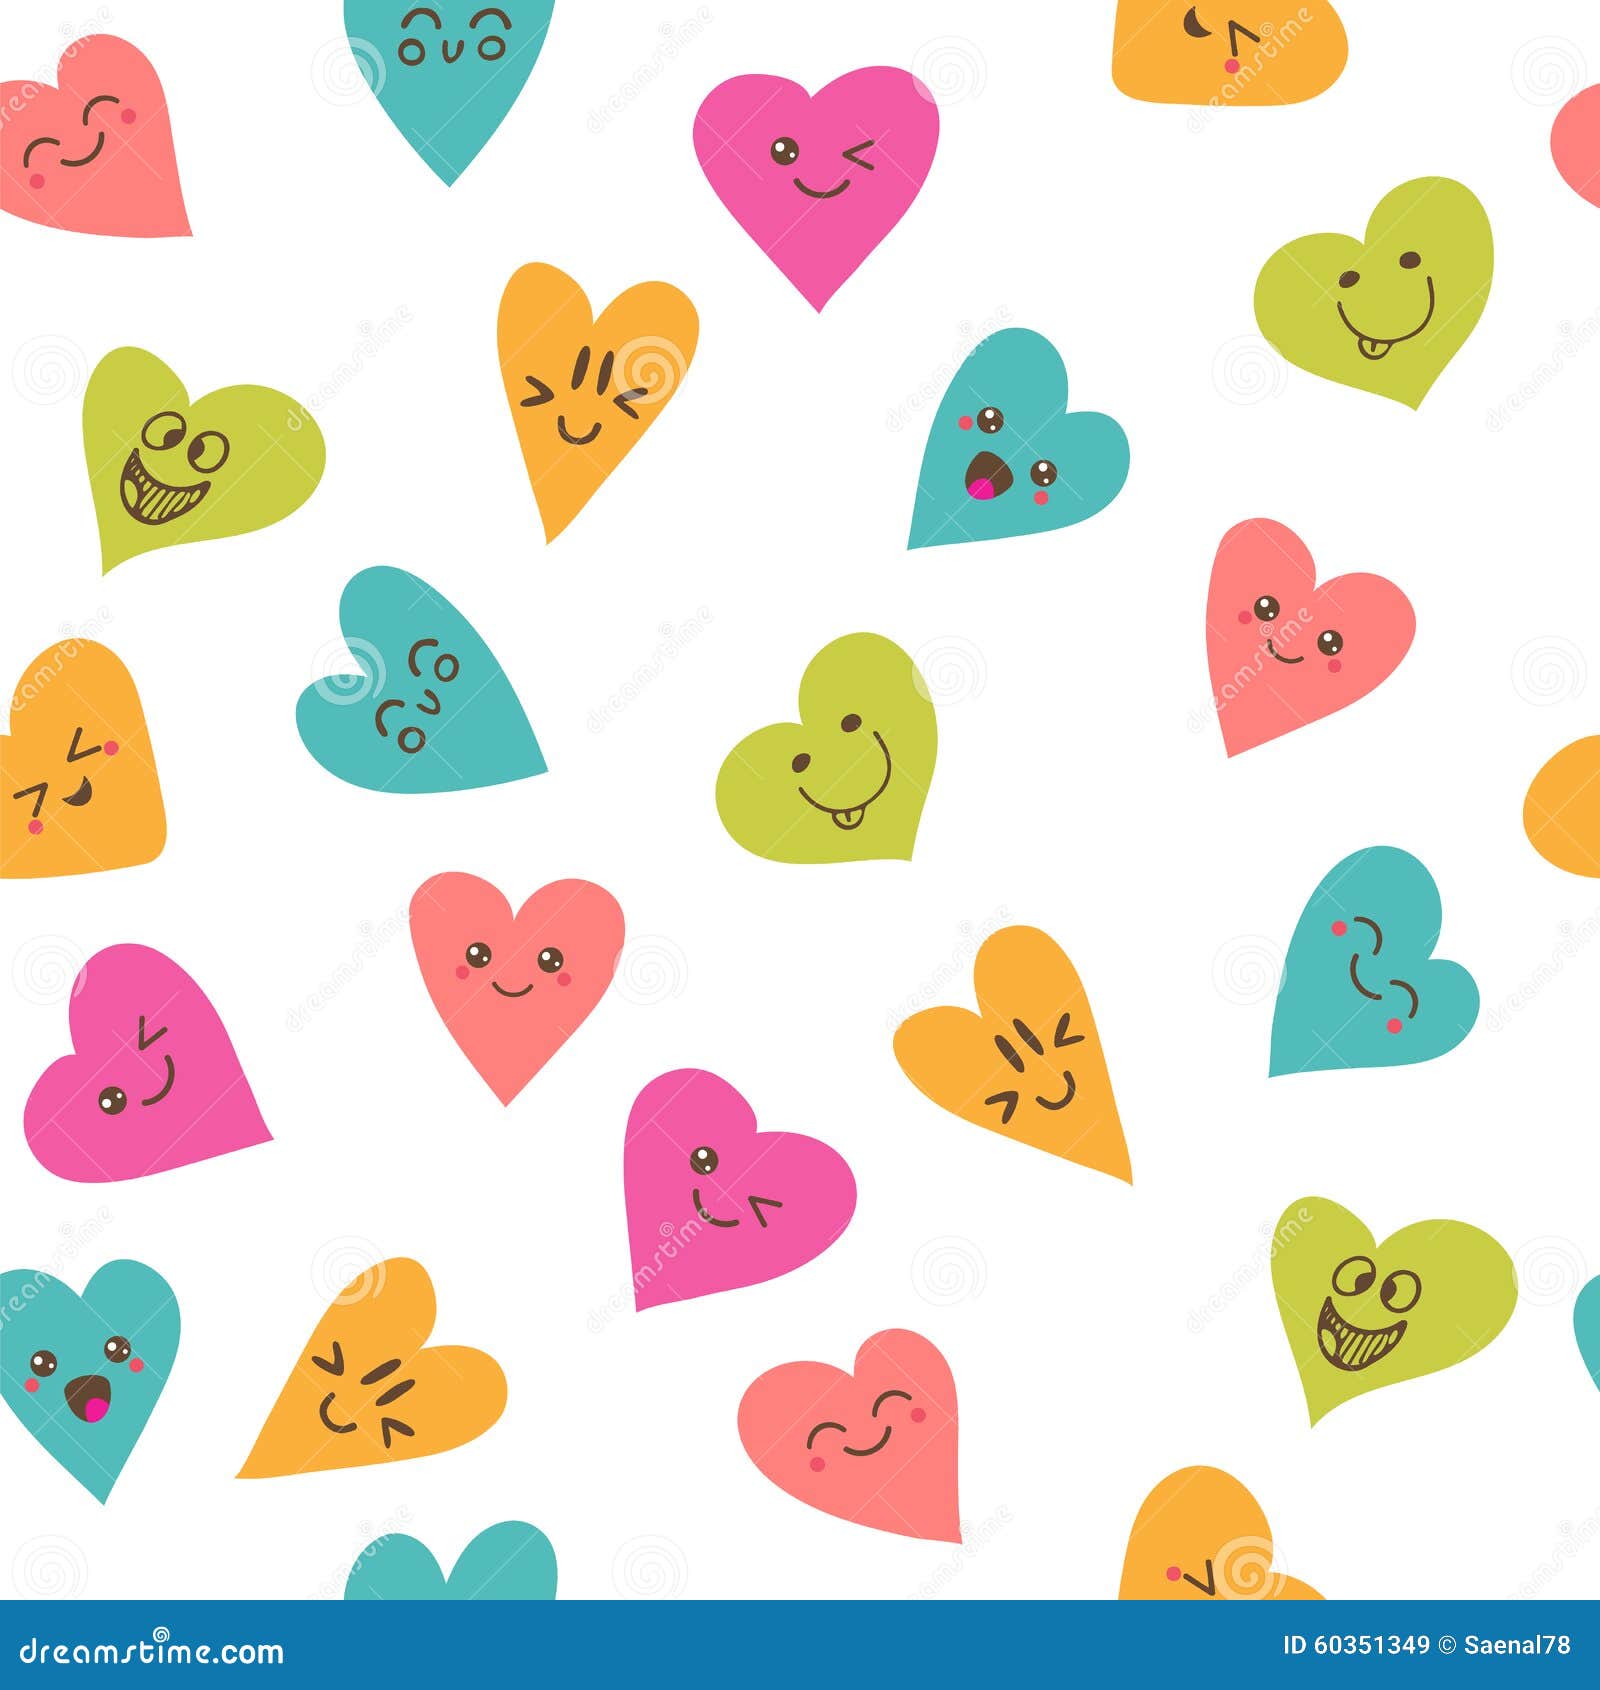 Seamless Pattern With Smiley Hearts. Cute Cartoon 